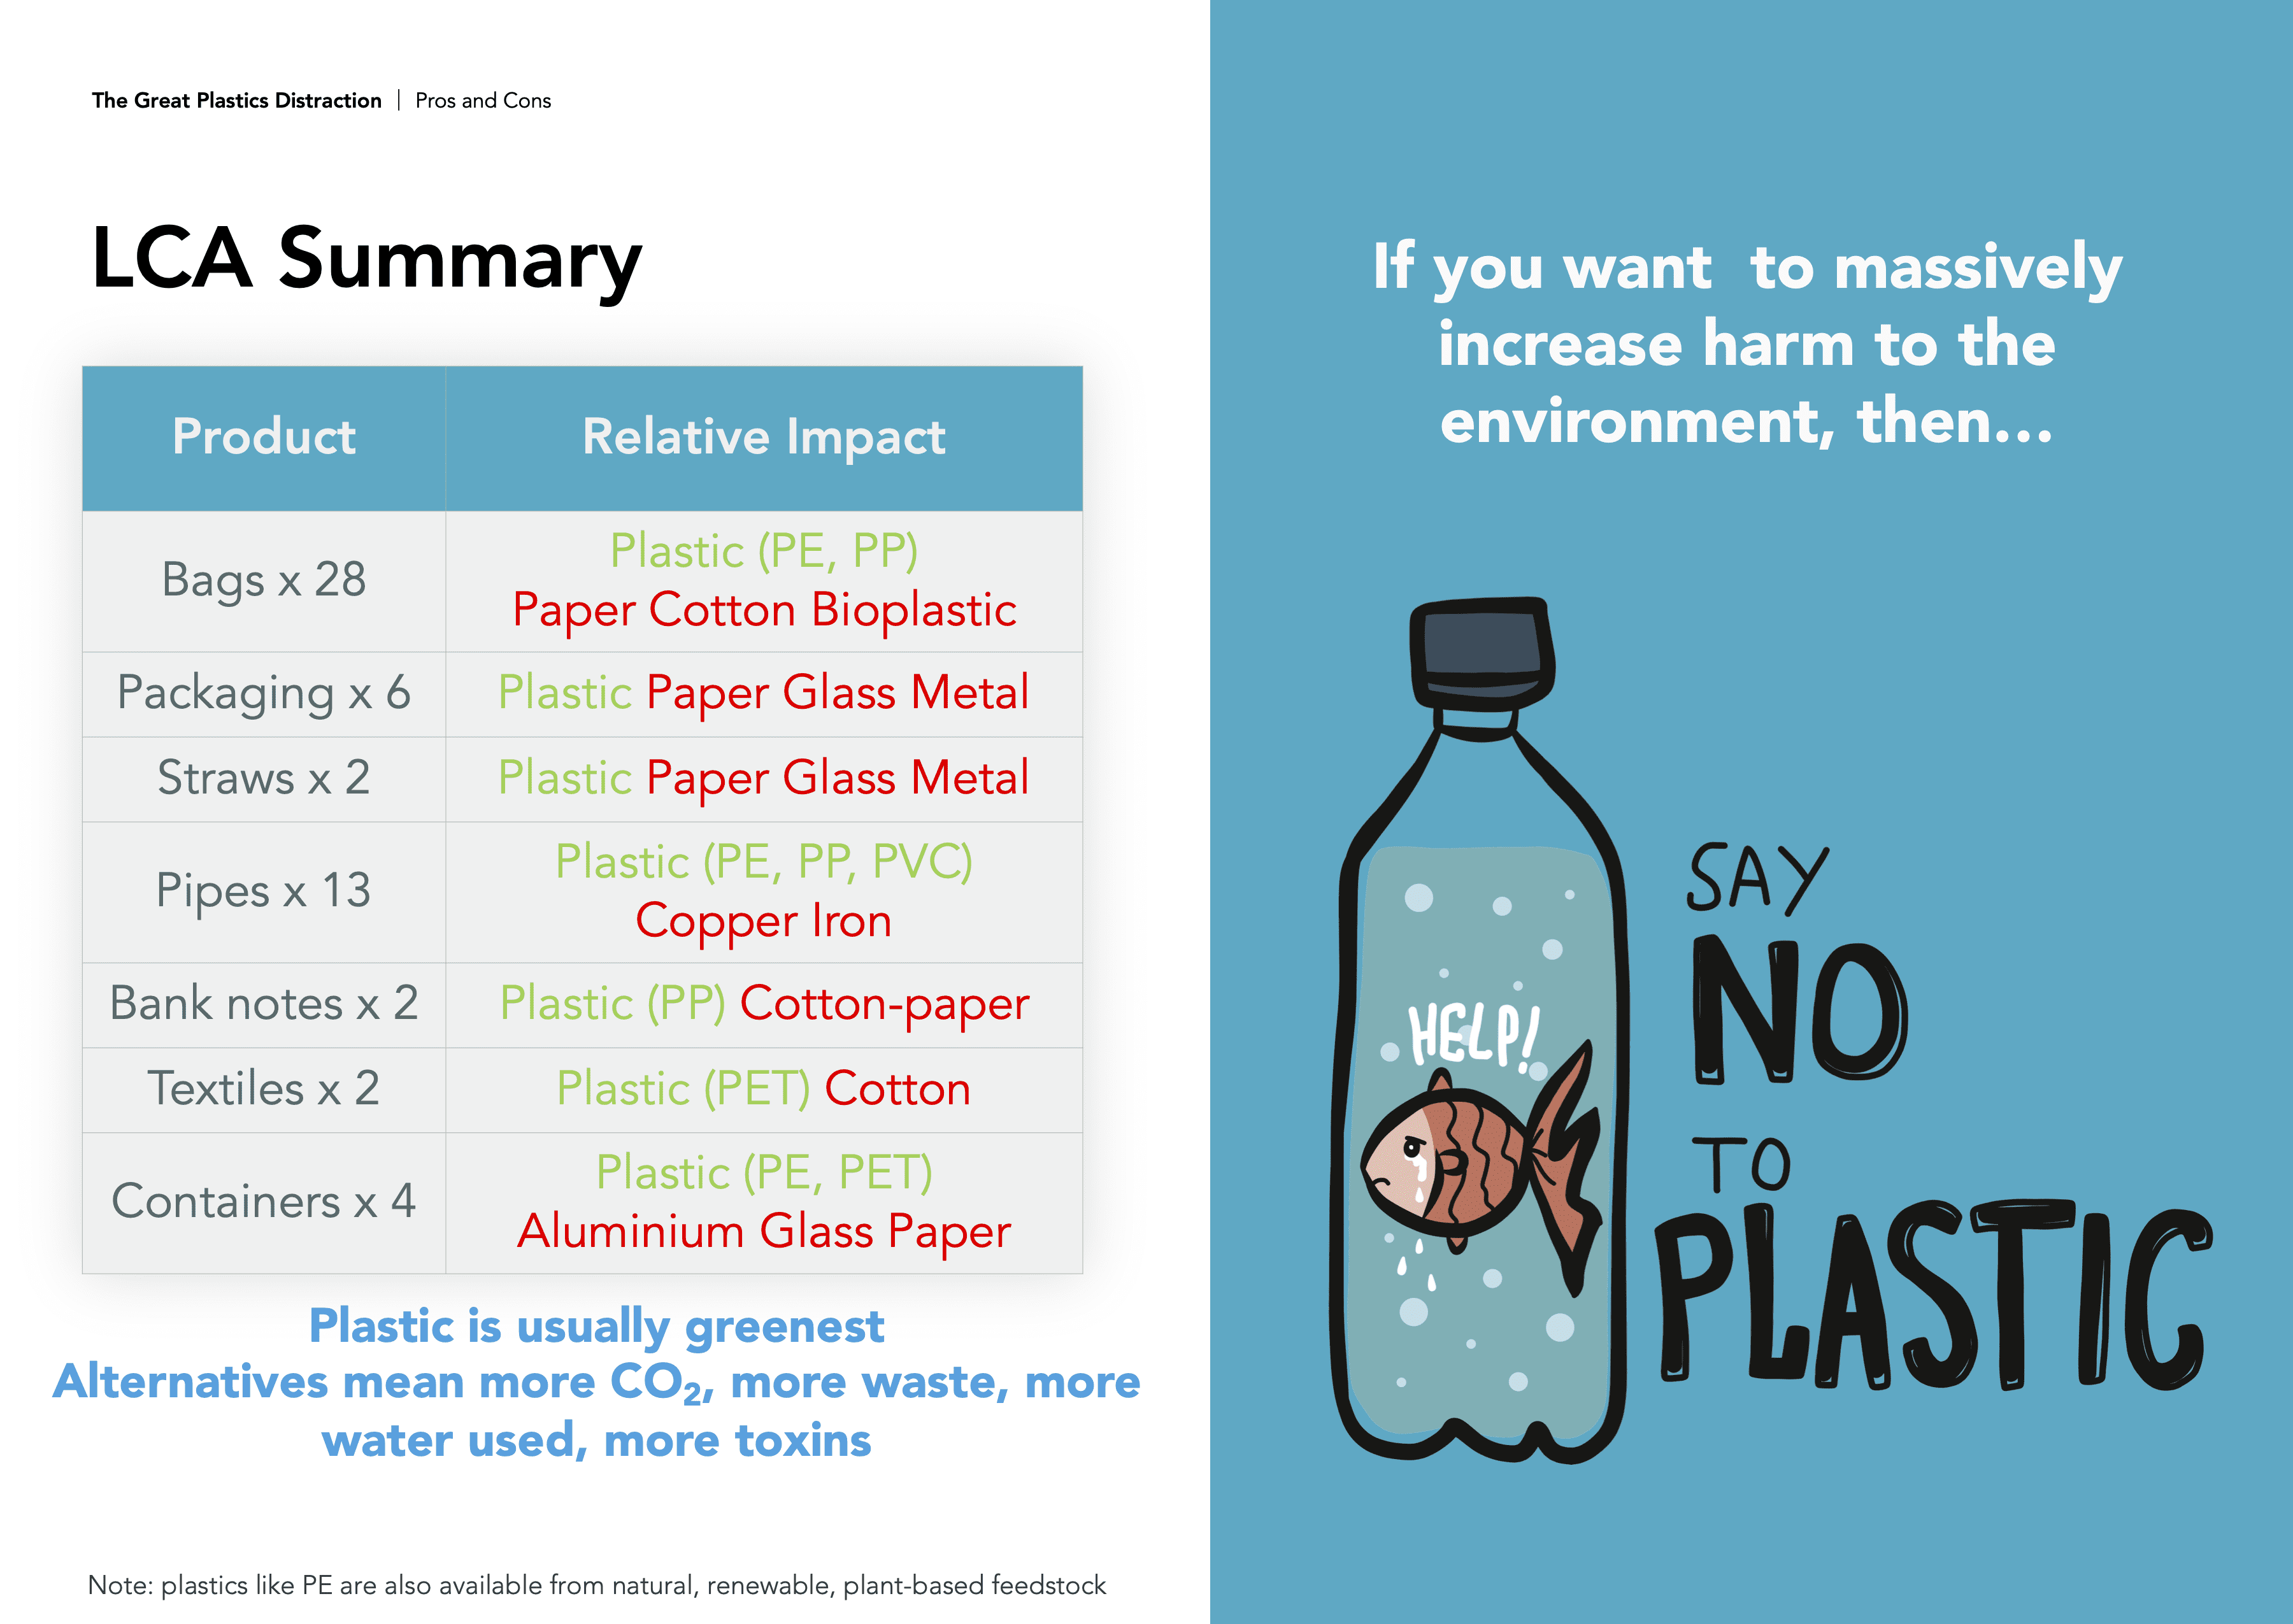 Plastics Life Cycle Compared to Other Materials Summary